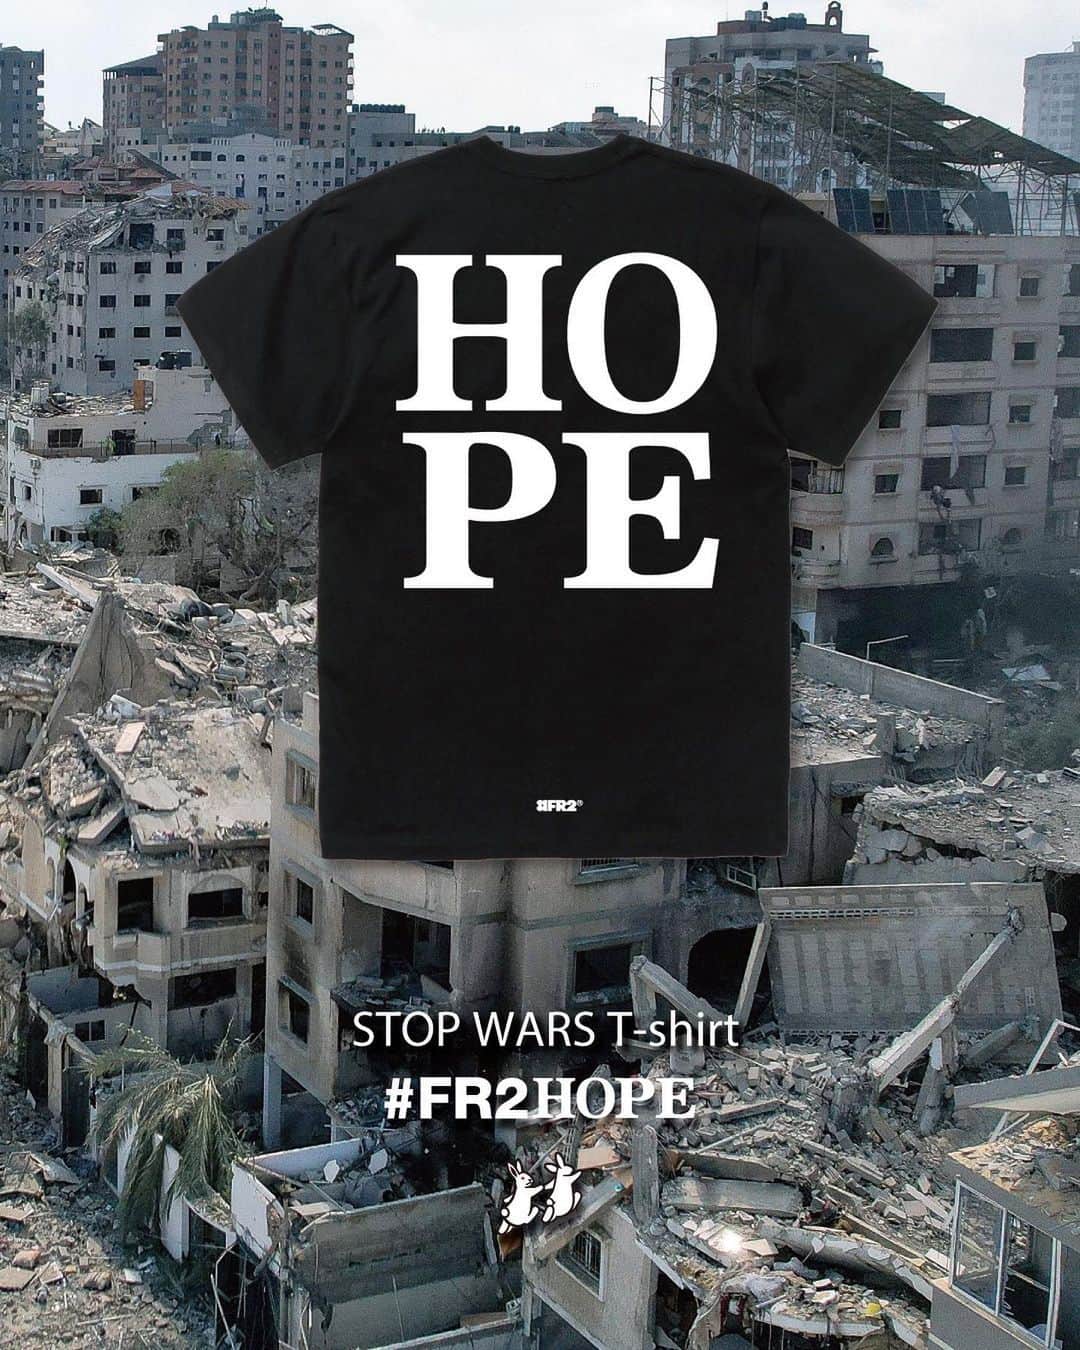 #FR2さんのインスタグラム写真 - (#FR2Instagram)「#FR2Hope As a project, we will provide support to the humanitarian crisis caused by the large-scale armed conflict between Israel and Palestine. Starting today, we will start accepting orders at the #FR2 Online Store. All proceeds from product sales, minus the costs involved in producing this project, will be donated to the Japanese Red Cross Society.  Order period: October 17th (Tuesday) to 23rd (Monday), 2023  #FR2希望 プロジェクトとして、イスラエル・パレスチナの大規模な武力衝突により発生した人道的危機への支援を行います。 本日から #FR2 Online Storeで受注販売を開始いたします。 こちらの企画の制作にかかわるコストを引いた商品の売上の全ては、日本赤十字社に寄付します。  受注期間：2023年10月17日（火）～23日（月）  #FR2Hope 作为一个项目，我们将为以色列和巴勒斯坦之间大规模武装冲突造成的人道主义危机提供支持。 从今天开始，我们将开始在 #FR2 在线商店接受订单。 产品销售的所有收益，减去制作该项目所涉及的成本，将捐赠给日本红十字会。  订购日期：2023年10月17日（星期二）至23日（星期一）  #FR2Hope 作為一個項目，我們將為以色列和巴勒斯坦之間大規模武裝衝突造成的人道主義危機提供支持。 從今天開始，我們將開始在 #FR2 線上商店接受訂單。 產品銷售的所有收益，減去製作該項目所涉及的成本，將捐贈給日本紅十字會。  訂購日期：2023年10月17日（星期二）至23日（星期一）  #FR2希望　#FR2HOPE」10月17日 18時59分 - fxxkingrabbits